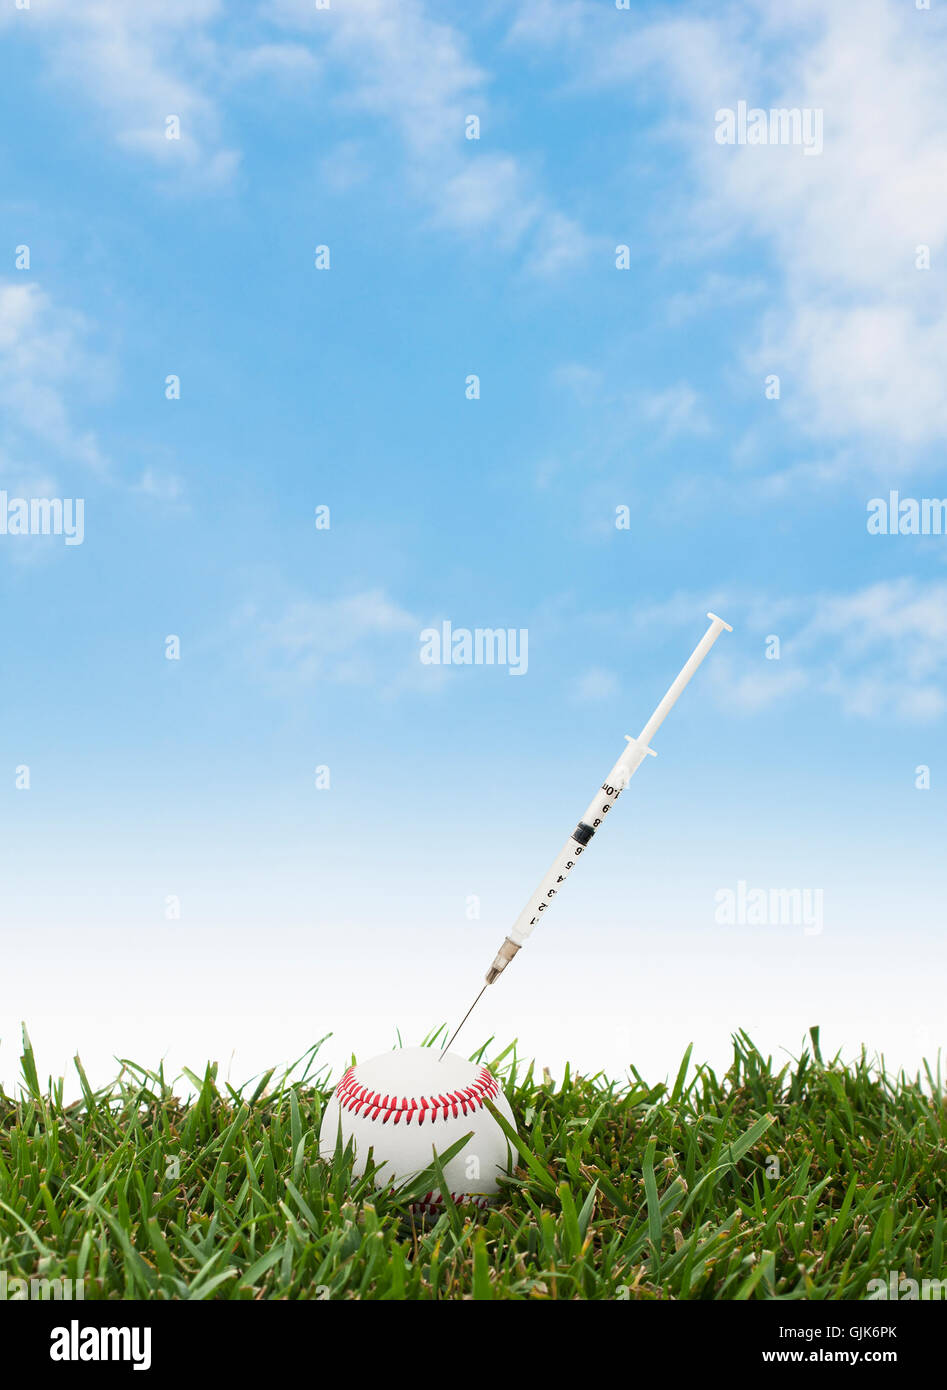 Baseball on grass with a syringe — performance enhancing drugs. Stock Photo